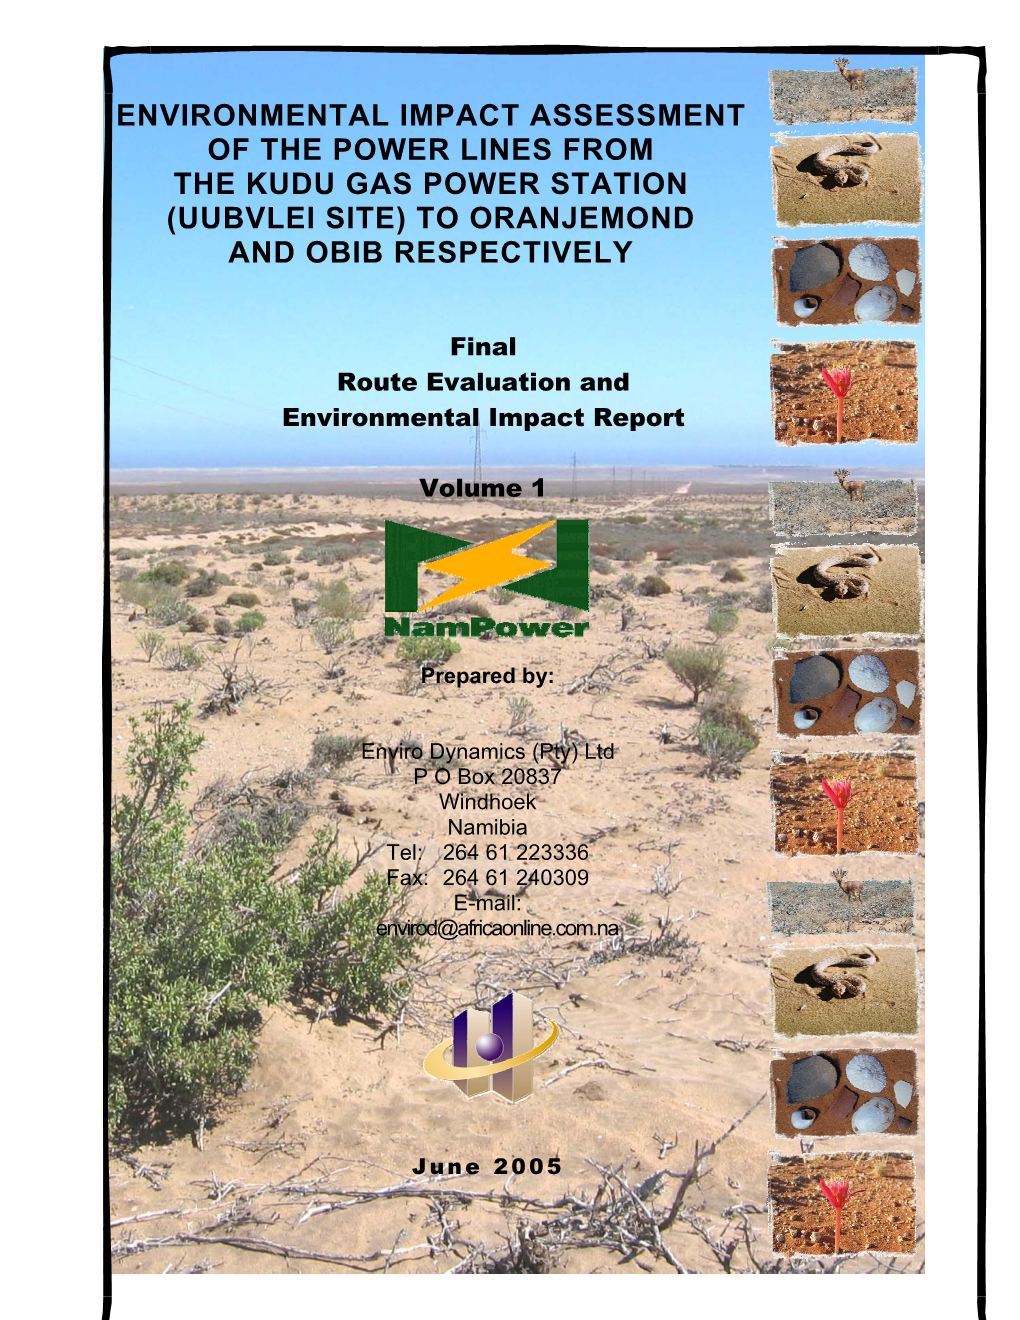 Environmental Impact Assessment of the Power Lines from the Kudu Gas Power Station (Uubvlei Site) to Oranjemond and Obib Respectively